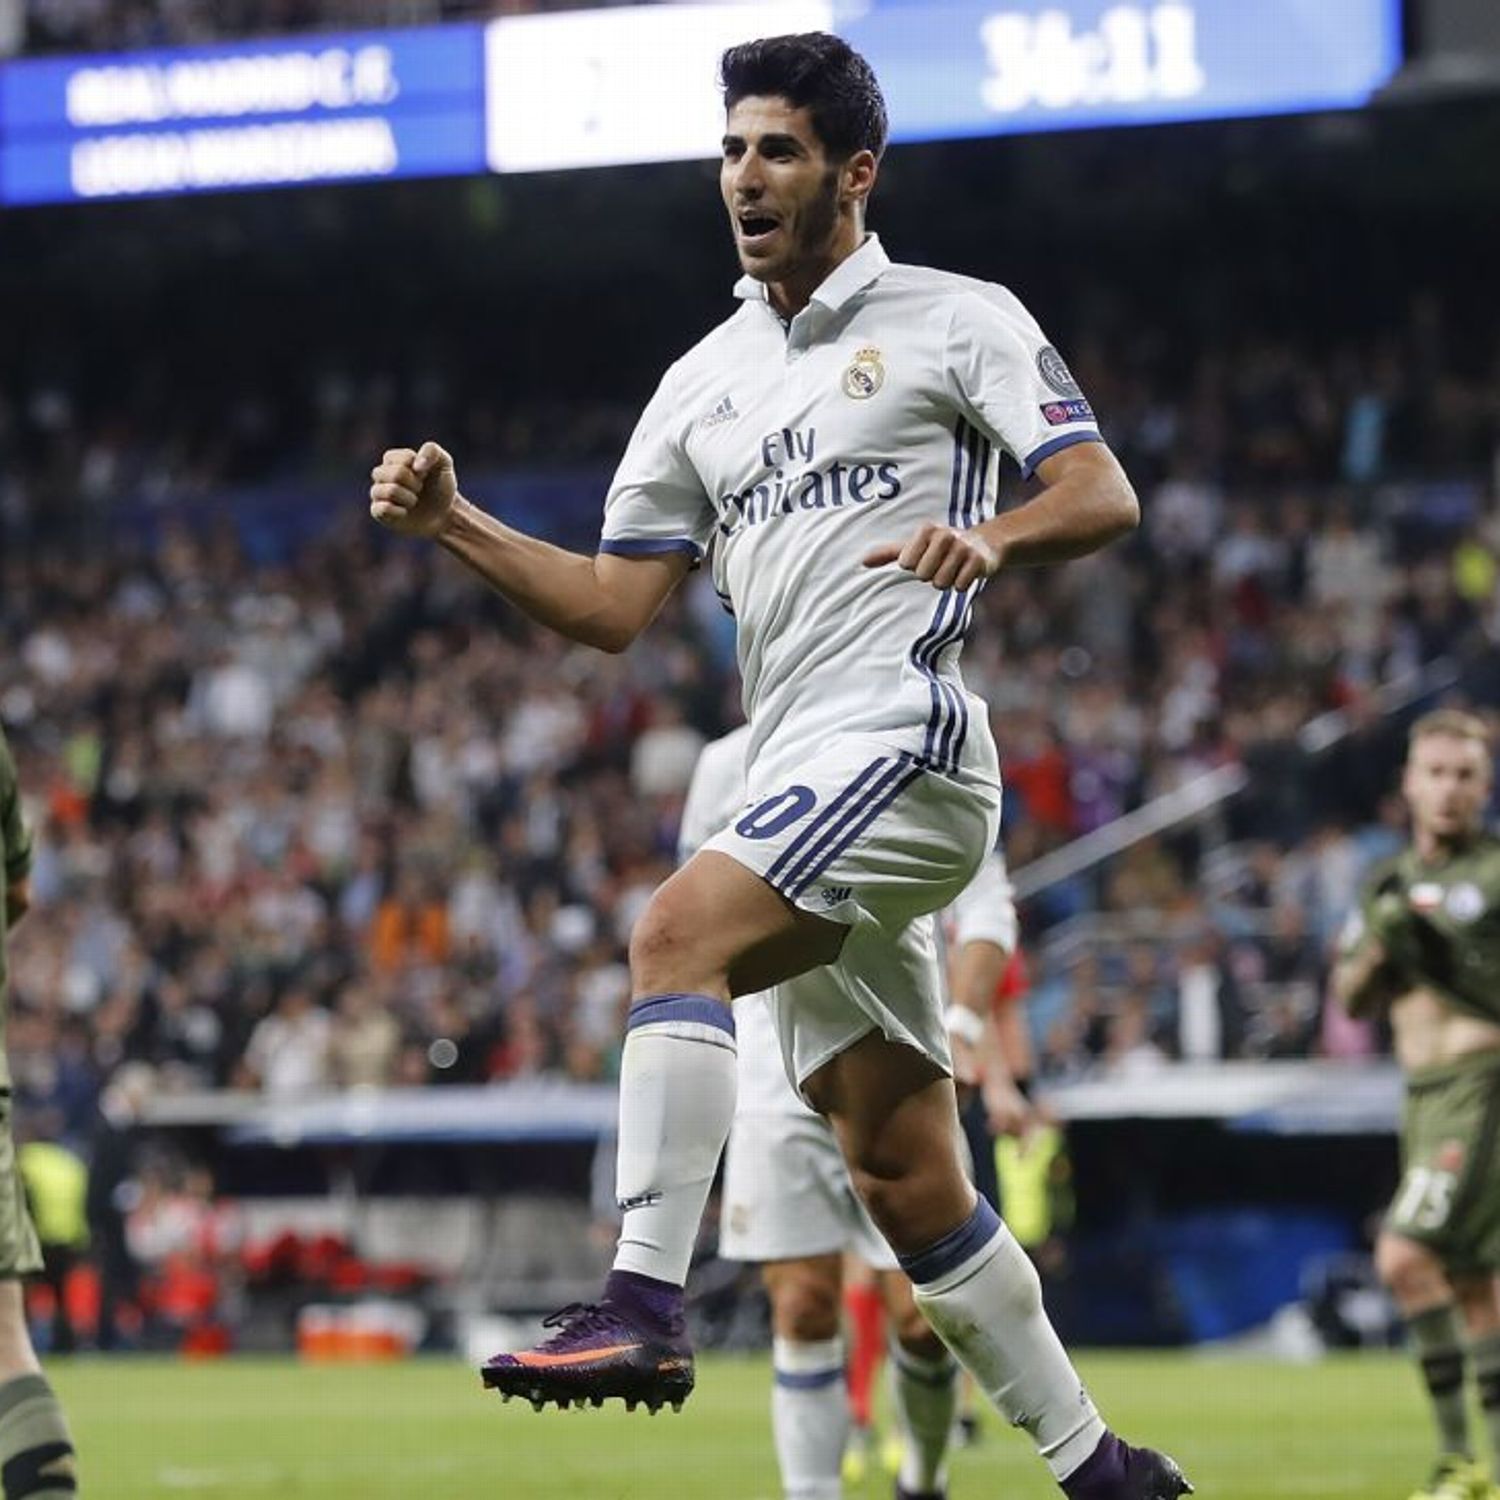 Marco Asensio is taking his chance to impress at Real Madrid - ESPN FC